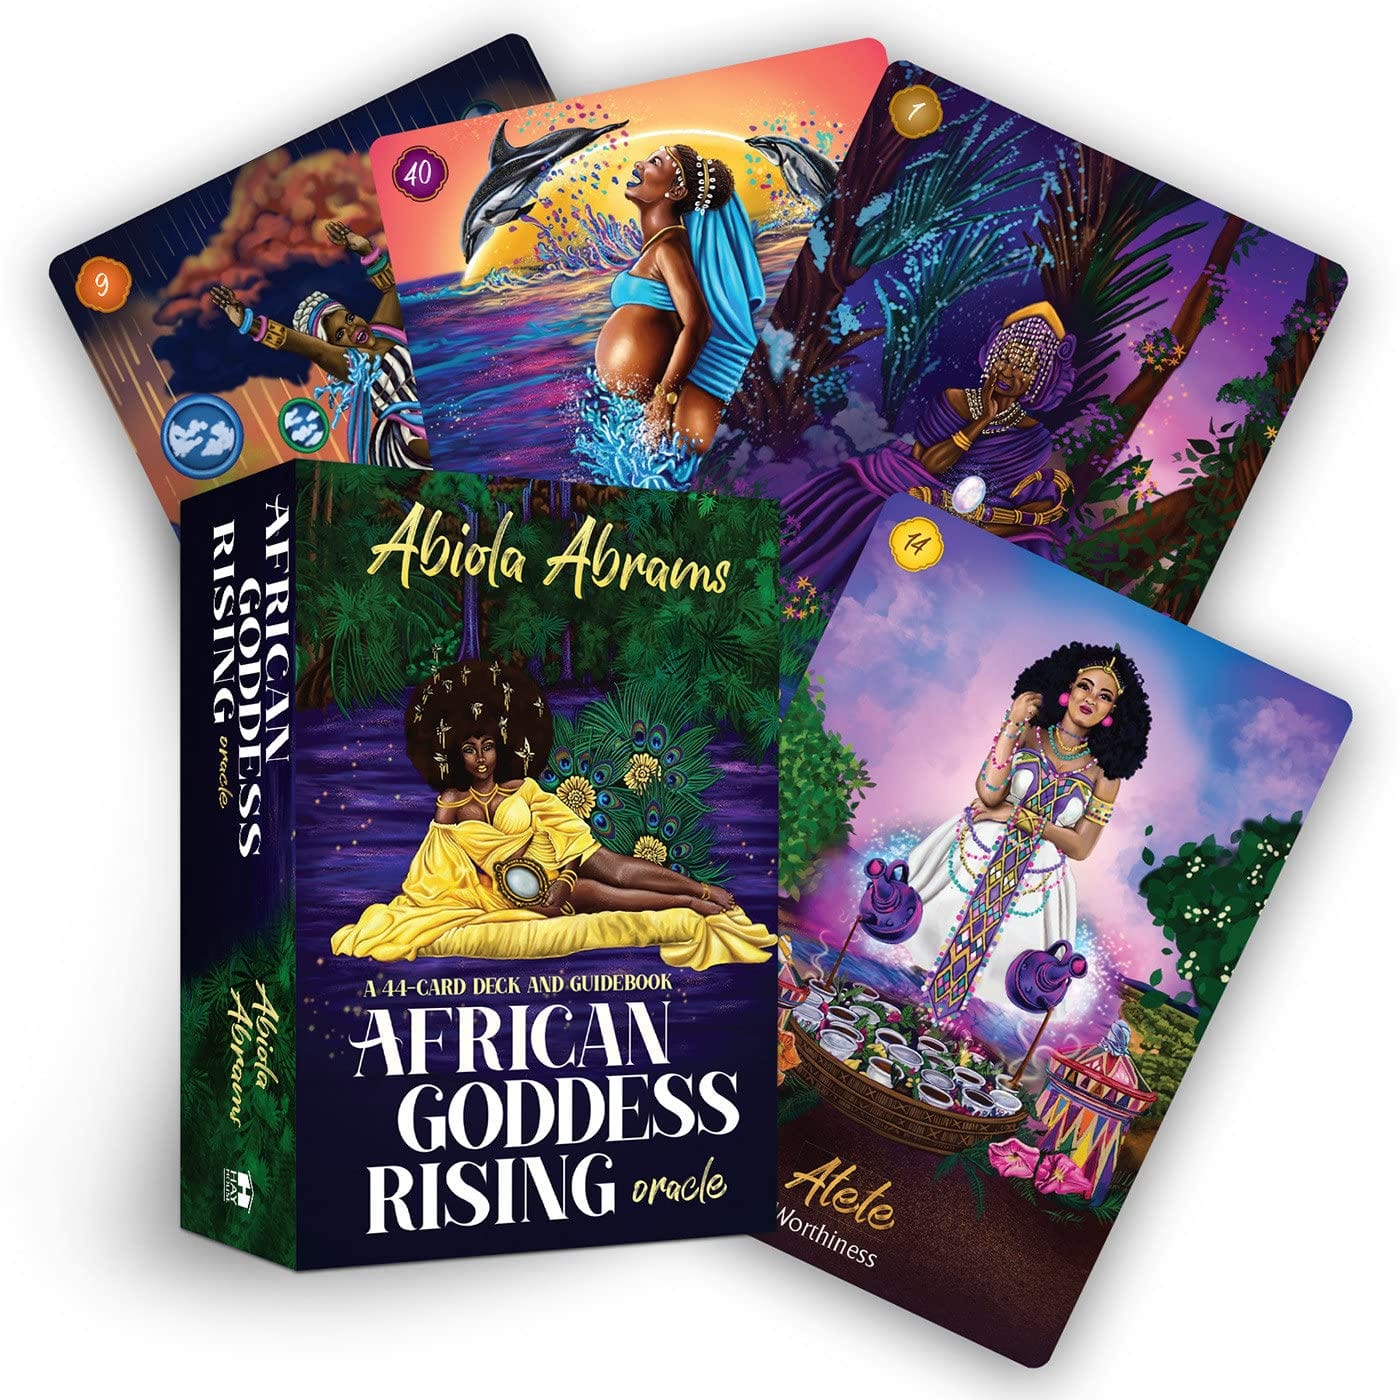 penguin African goddess rising oracle A 44-Card deck and guidebook author:  Abiola Abrams